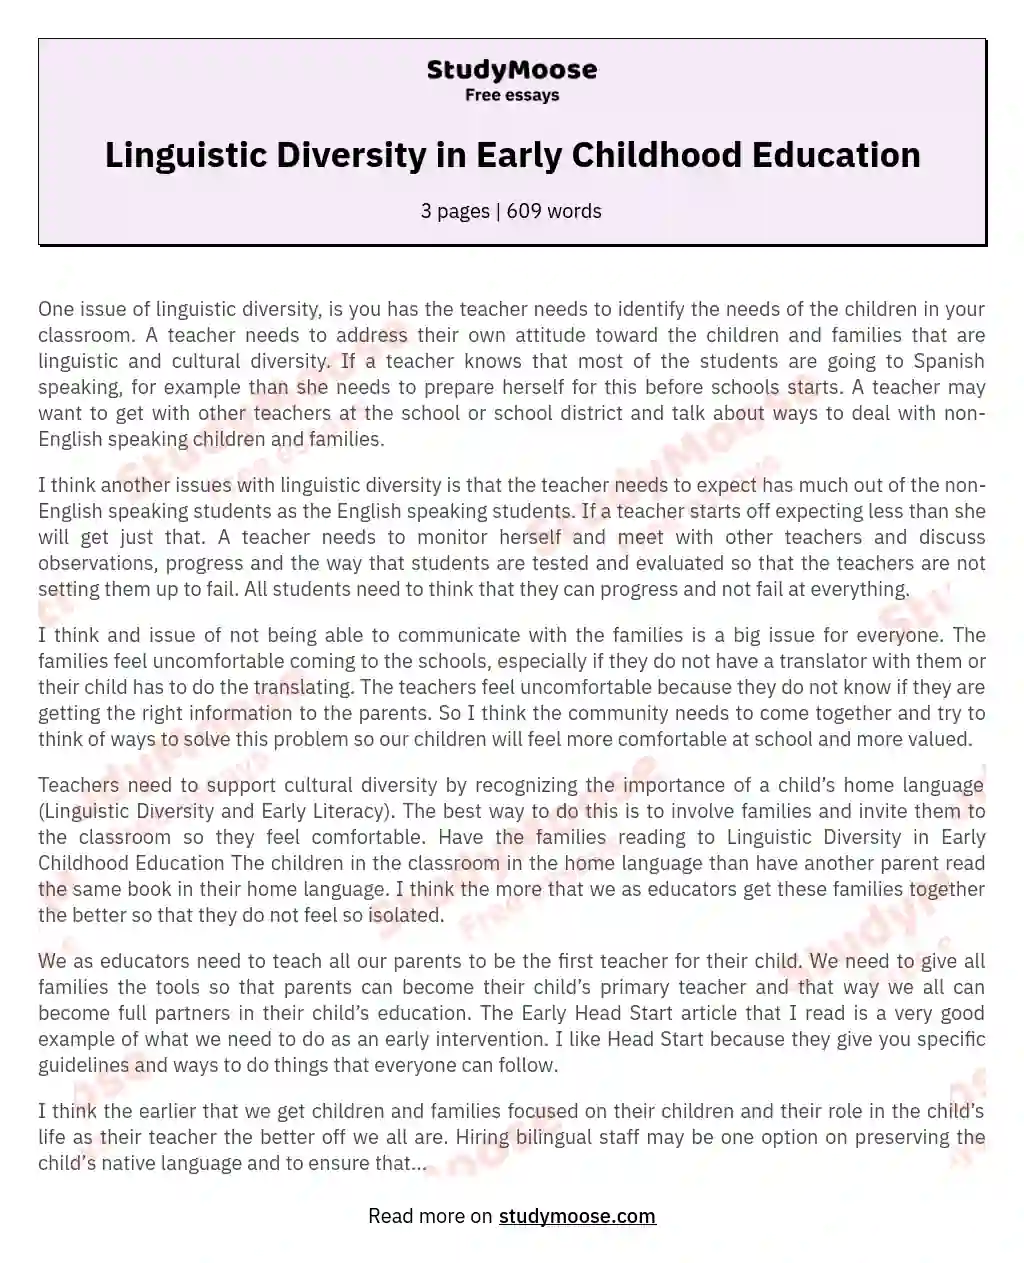 Linguistic Diversity in Early Childhood Education essay